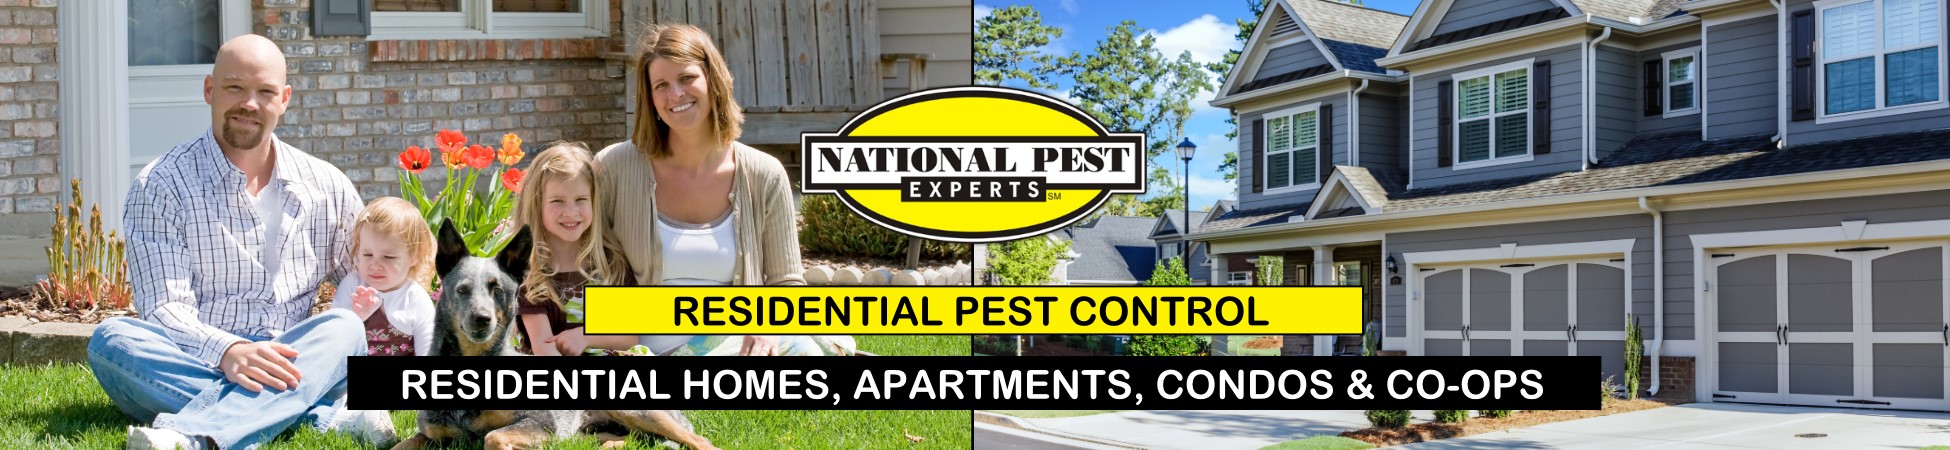 National Pest Experts - Residential exterminating and pest control in Glenwood Landing, NY